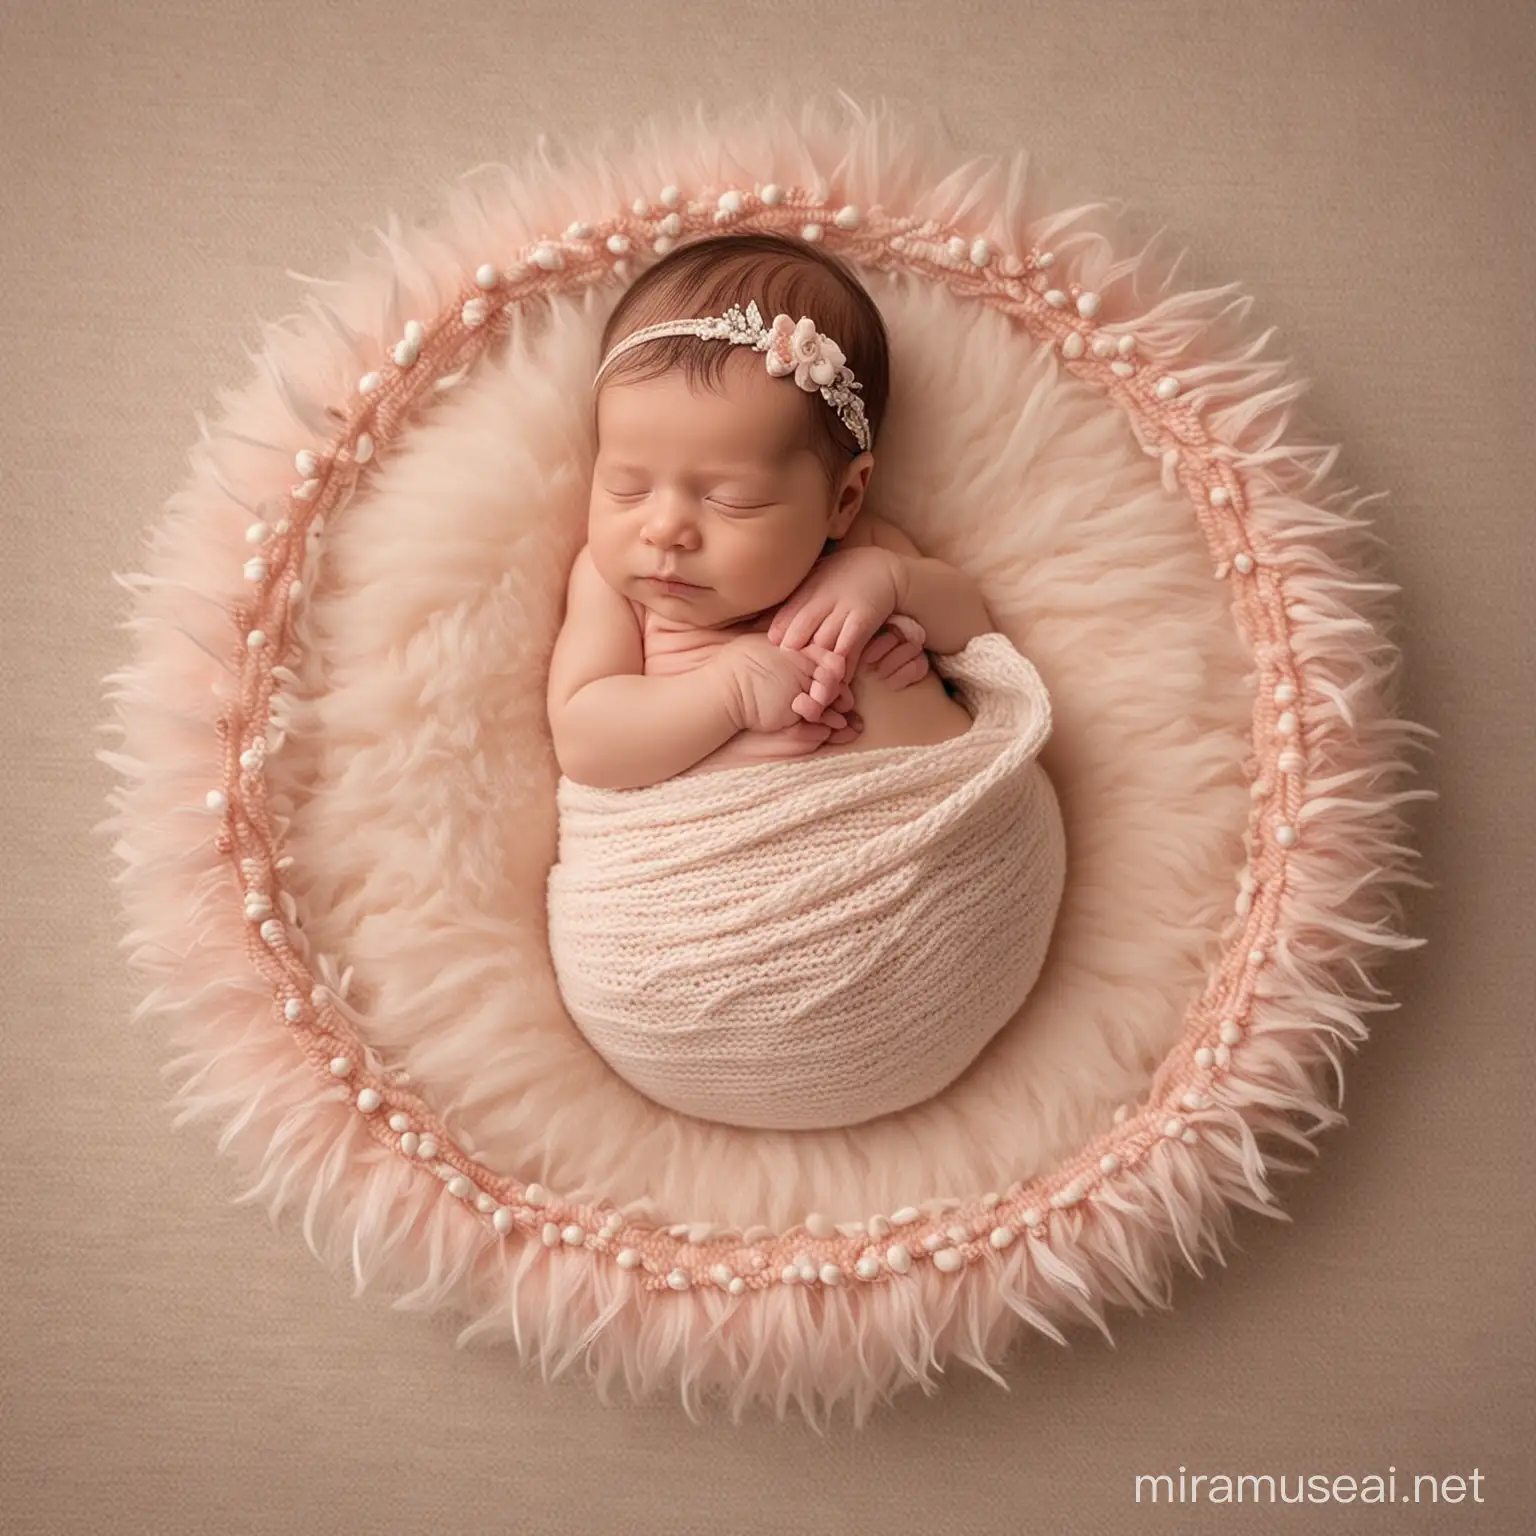 Captivating Newborn Photography Images for Advertising Campaigns